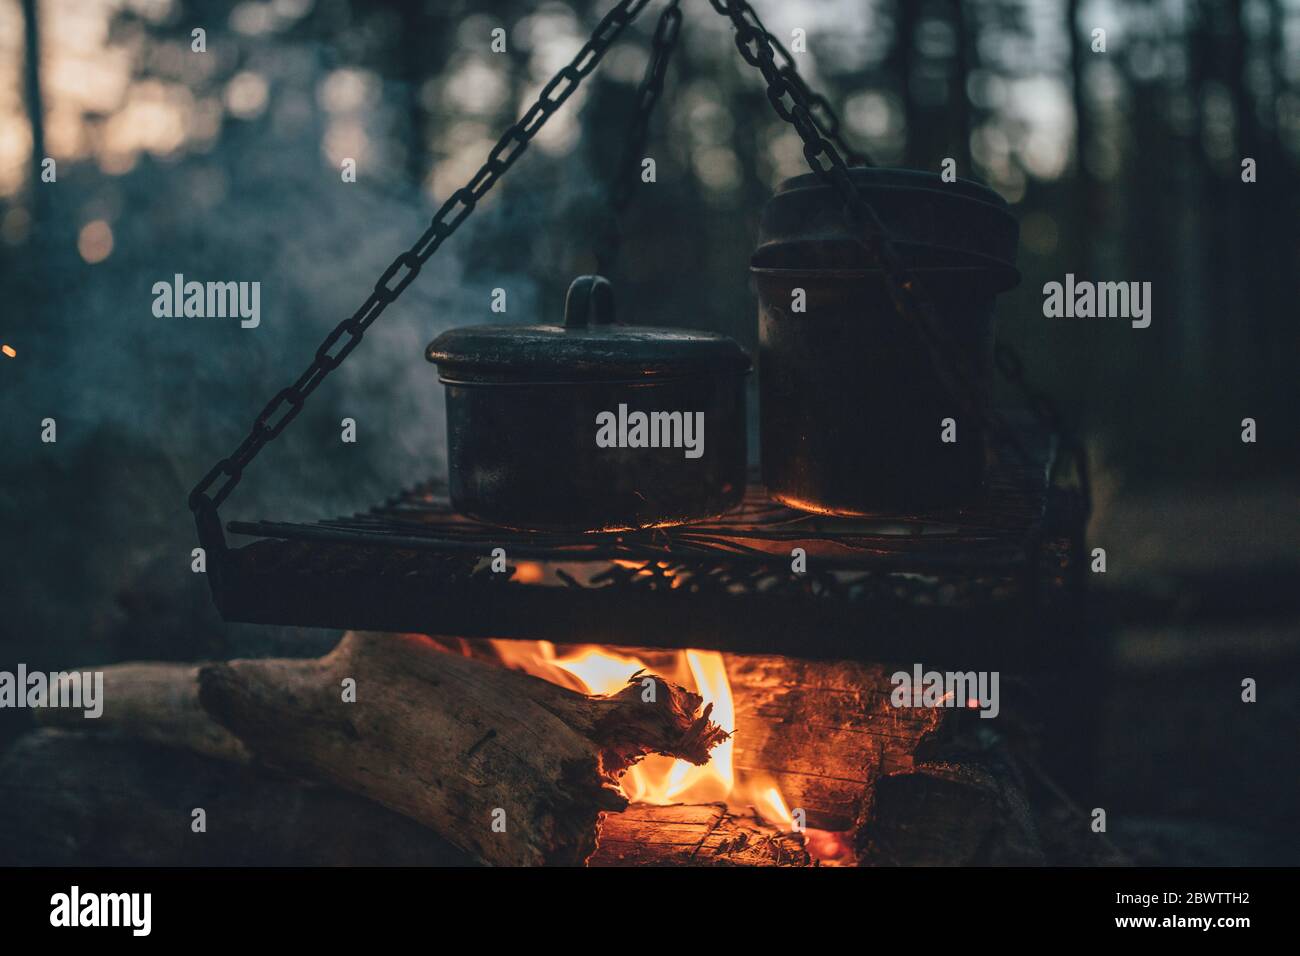 Pots cooking over campfire Stock Photo - Alamy